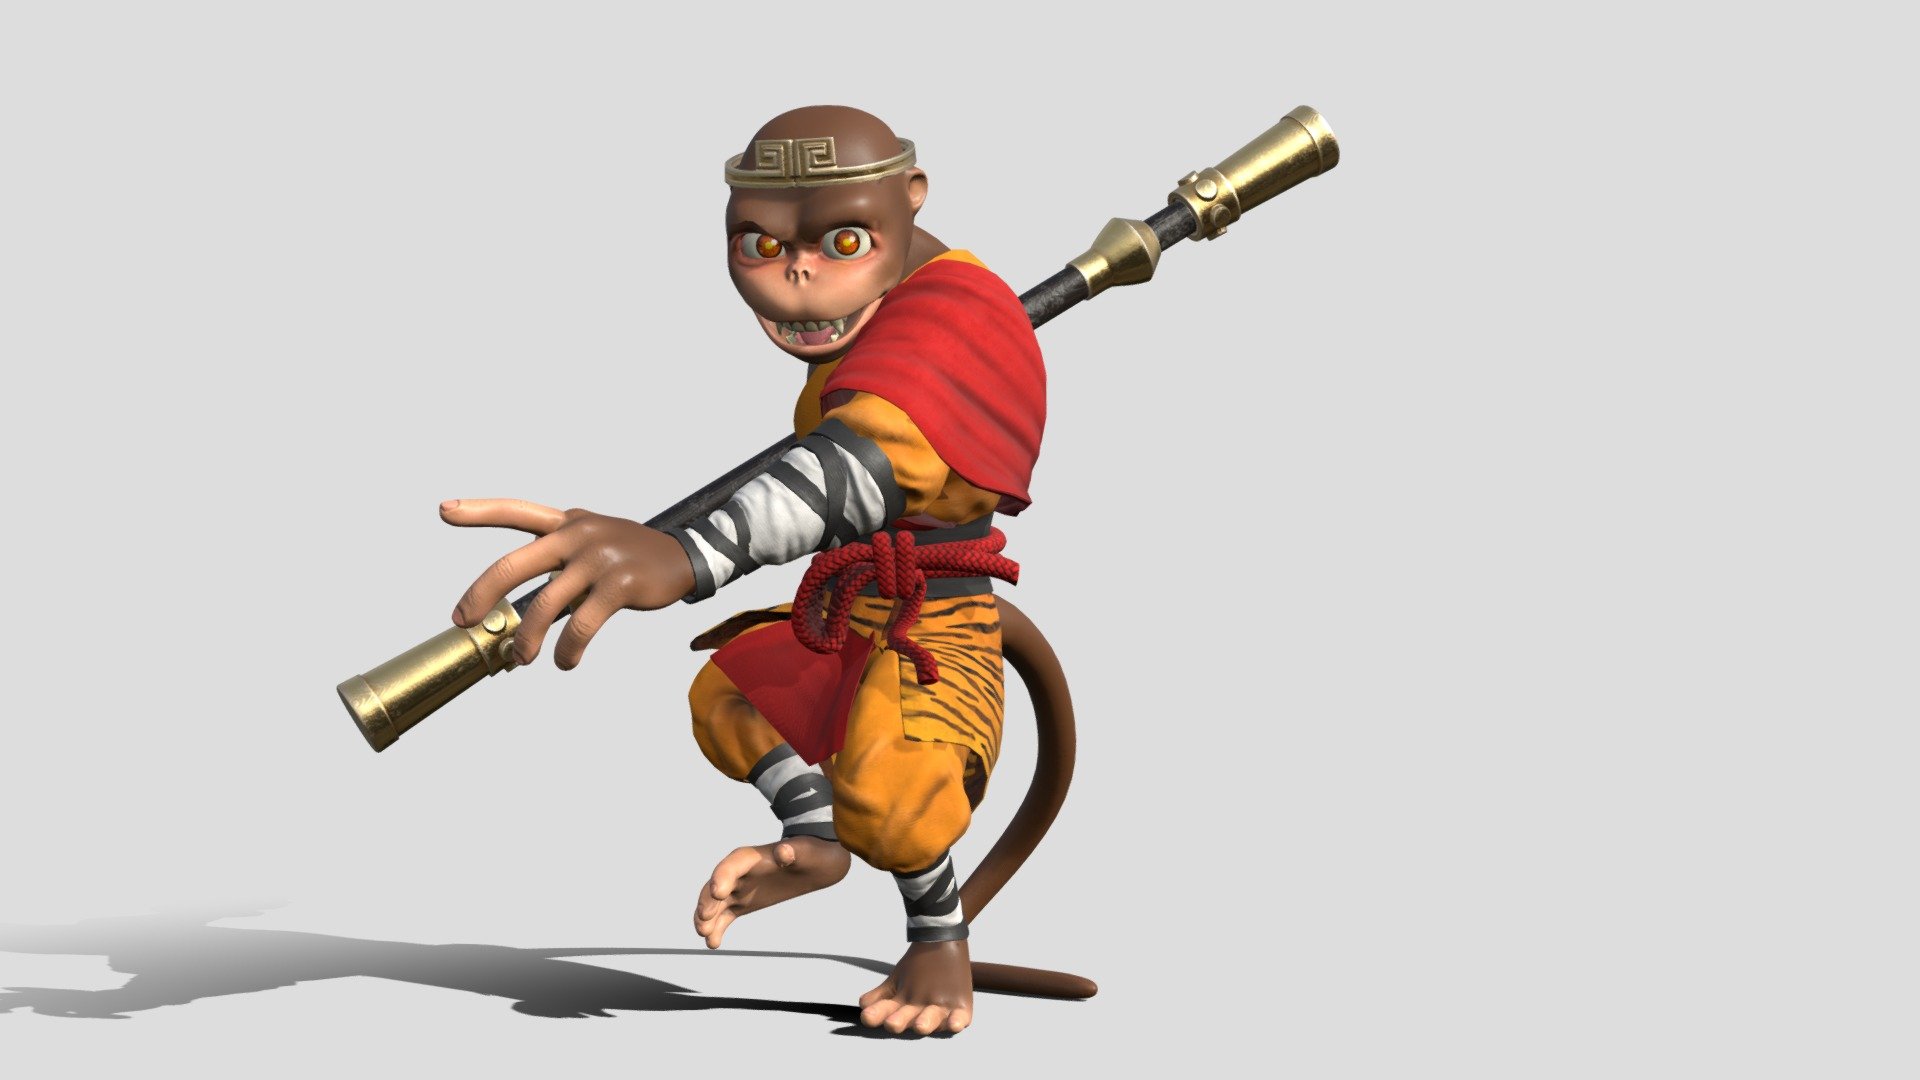 This work is an original art licensed under CC BY-NC 4.0

Original concept ALL RIGHTS RESERVED

Hi everyone! Here my latest work: an original concept of Sun Wukong, the legendary Handsome Monkey-King from the 16th-century Chinese novel &ldquo;Journey to the West